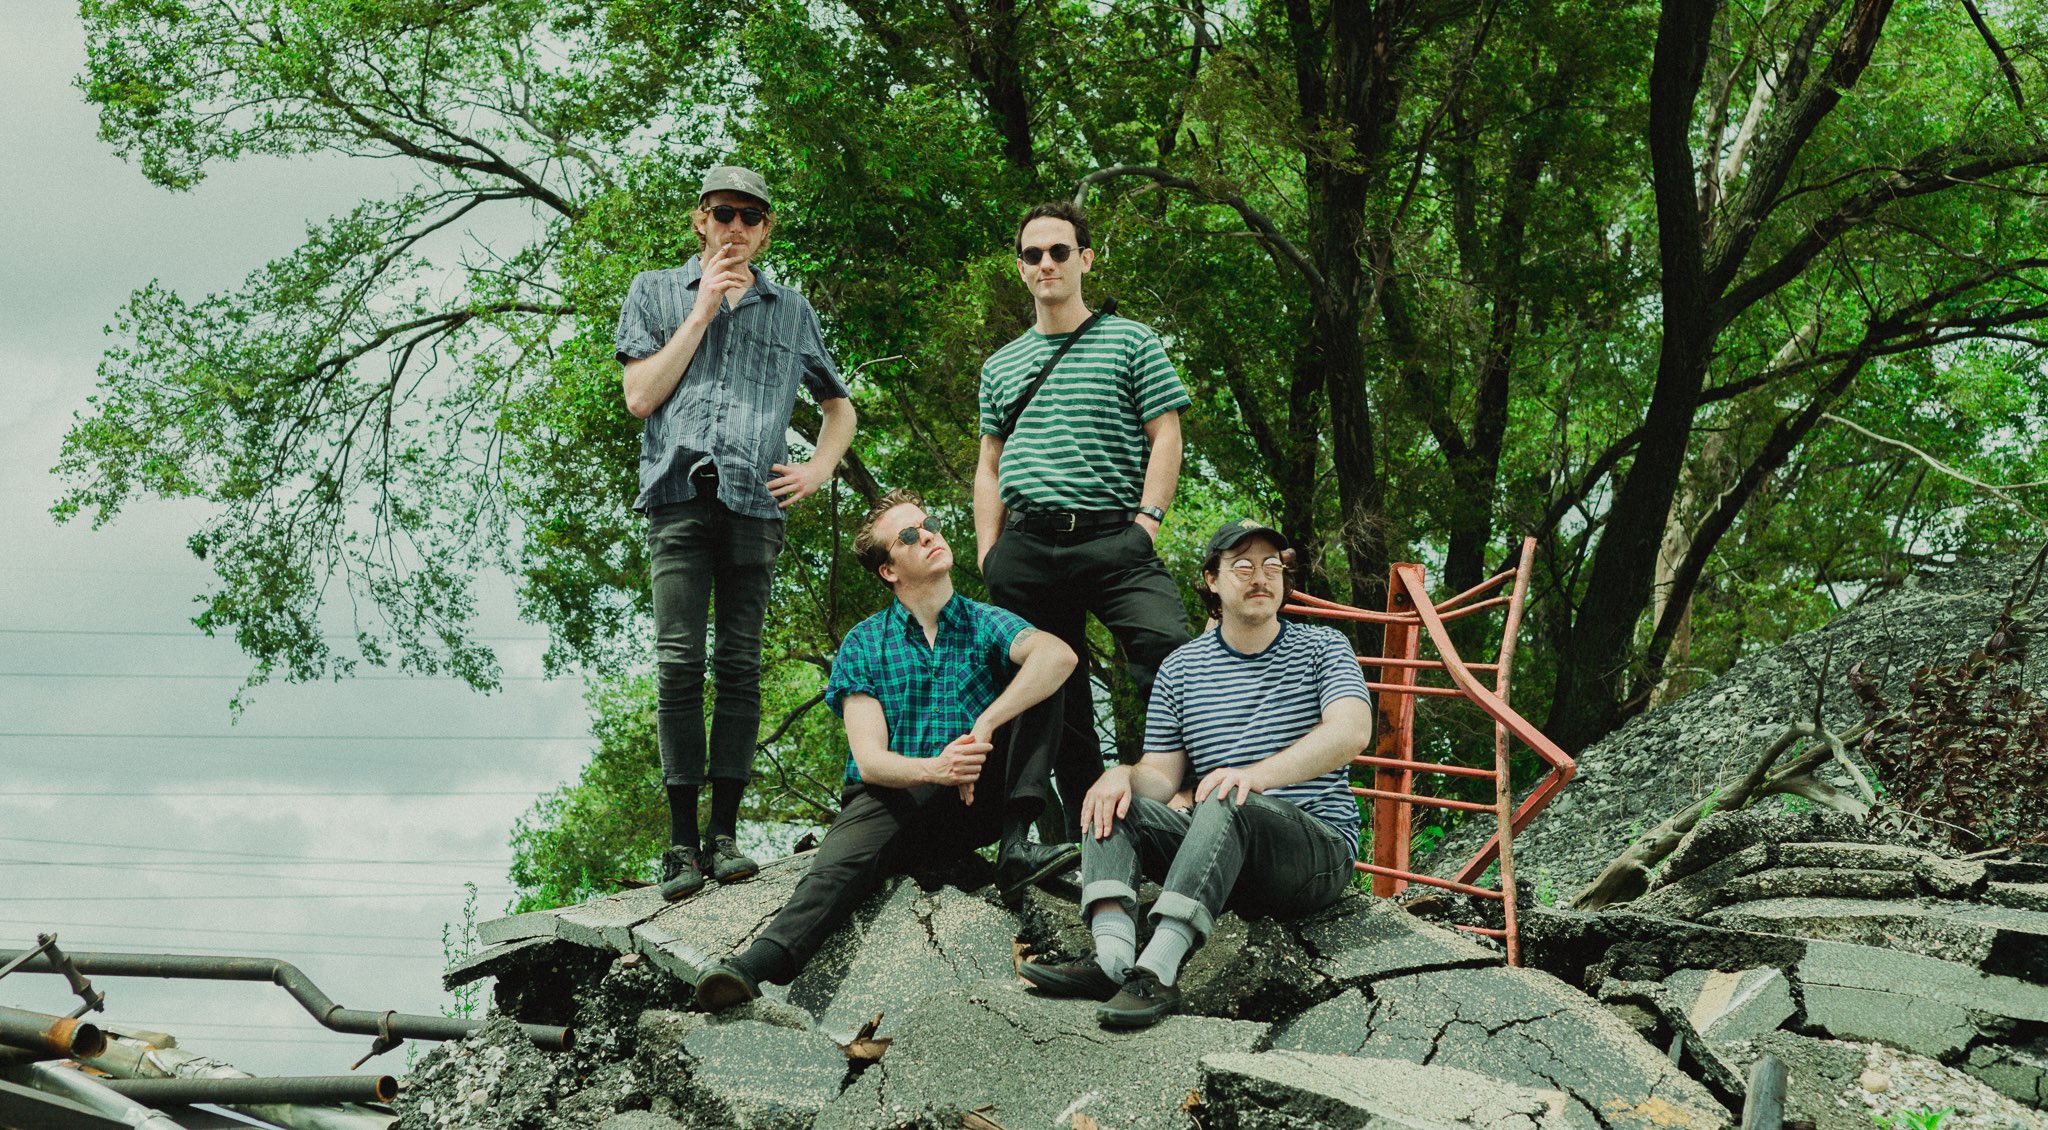 FLOOD - Stuck Announce New EP “Content That Makes You Feel Good,” Share  First Single Which Makes You Feel Bad